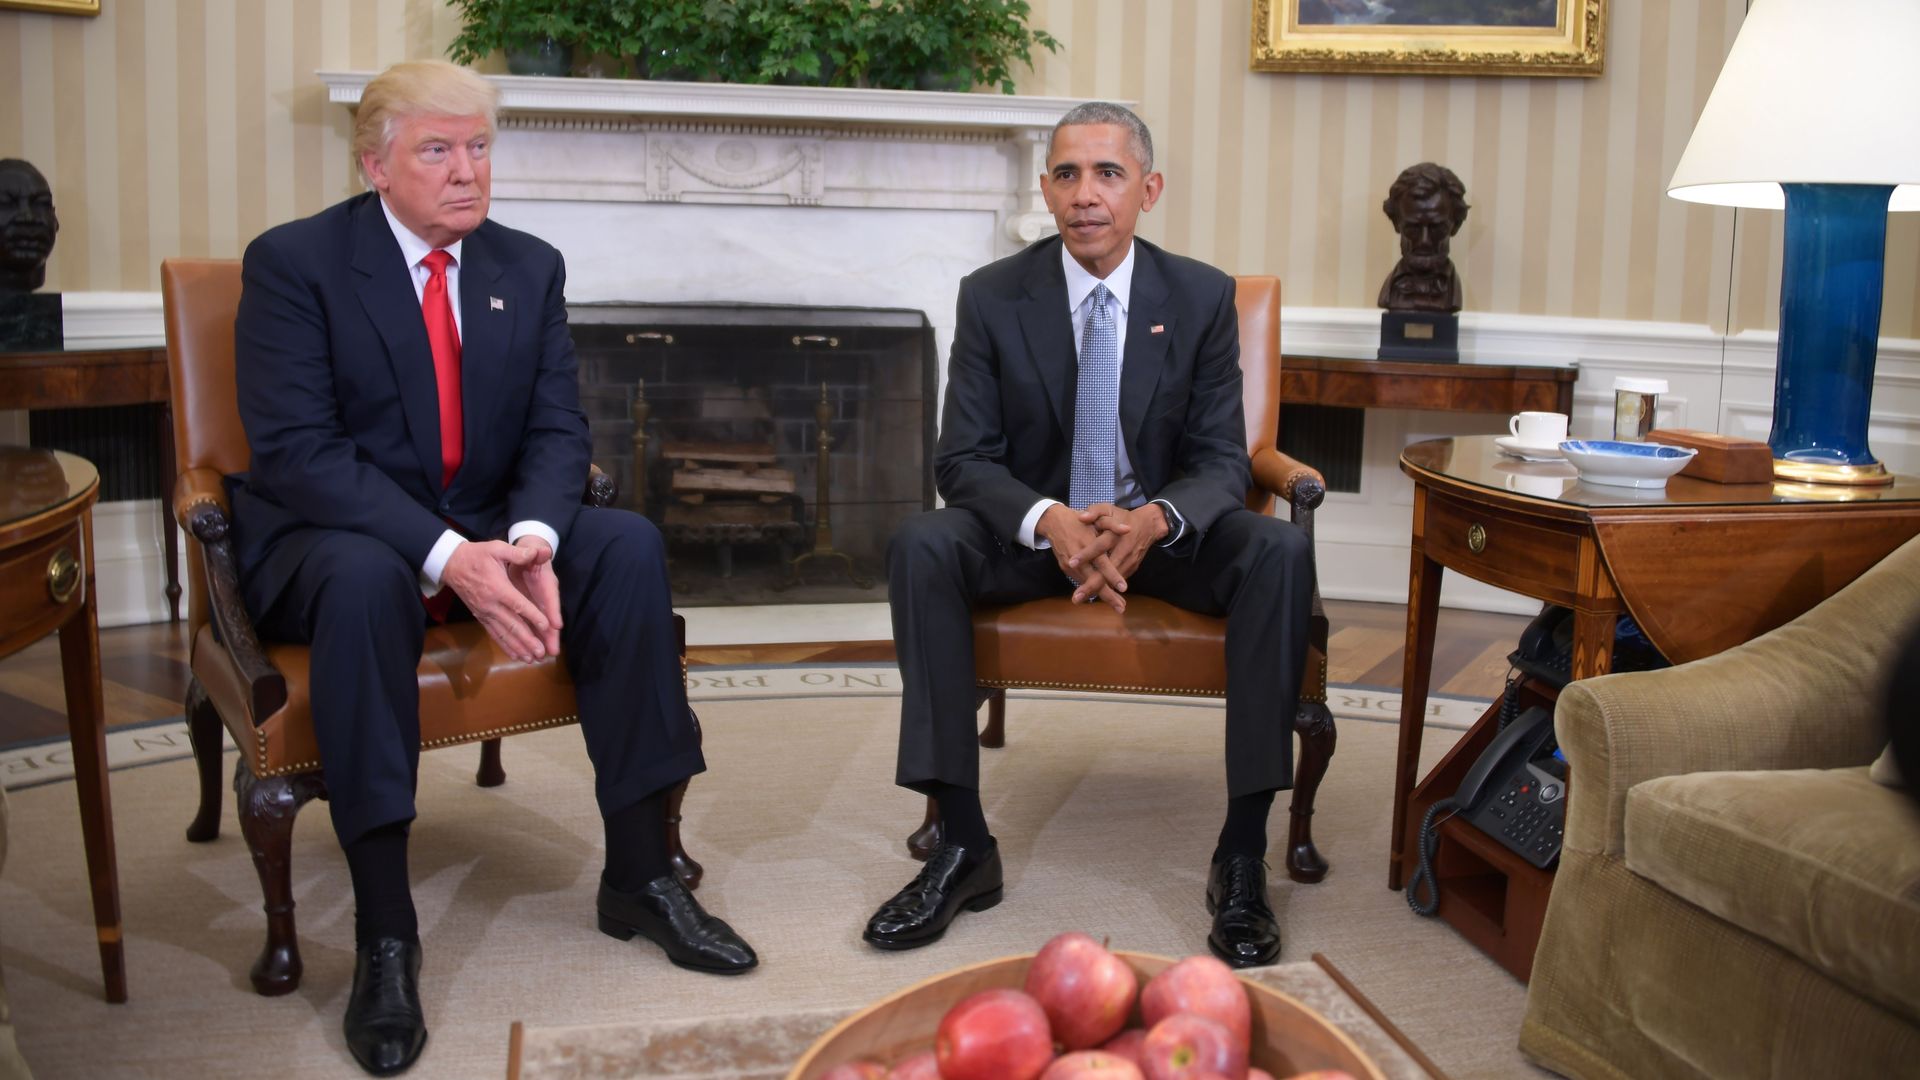 President Barack Obama meets with President-elect Donald Trump to update him on transition planning in the Oval Office at the White House on November 10, 2016 in Washington,DC. 